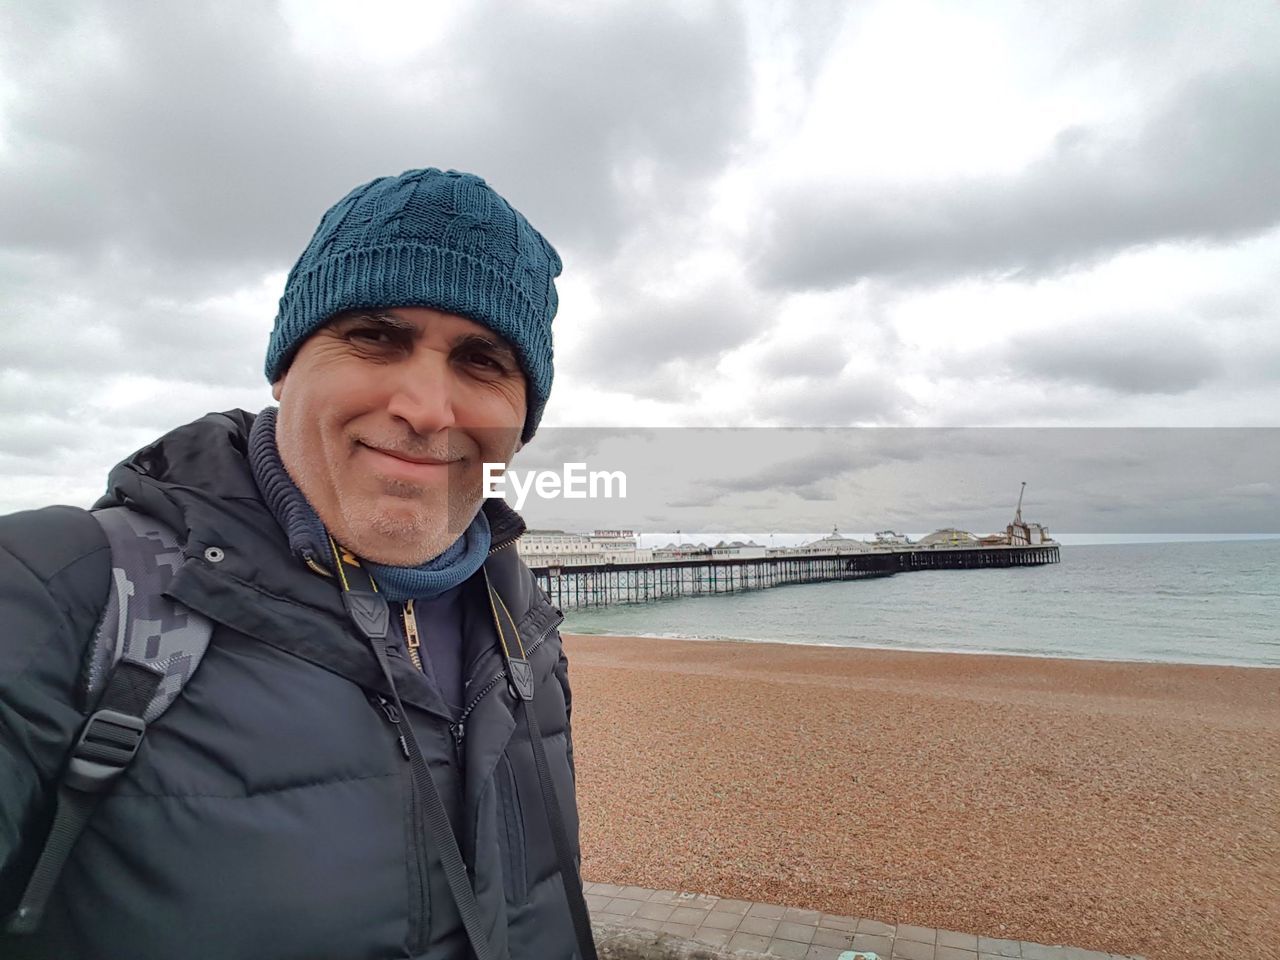 cloud, smiling, portrait, water, one person, sea, sky, adult, looking at camera, happiness, clothing, nature, emotion, land, beach, men, overcast, holiday, vacation, day, cheerful, trip, mature adult, human face, hat, standing, front view, person, leisure activity, outdoors, travel, teeth, smile, travel destinations, senior adult, waist up, occupation, winter, sports, transportation, lifestyles, jacket, nautical vessel